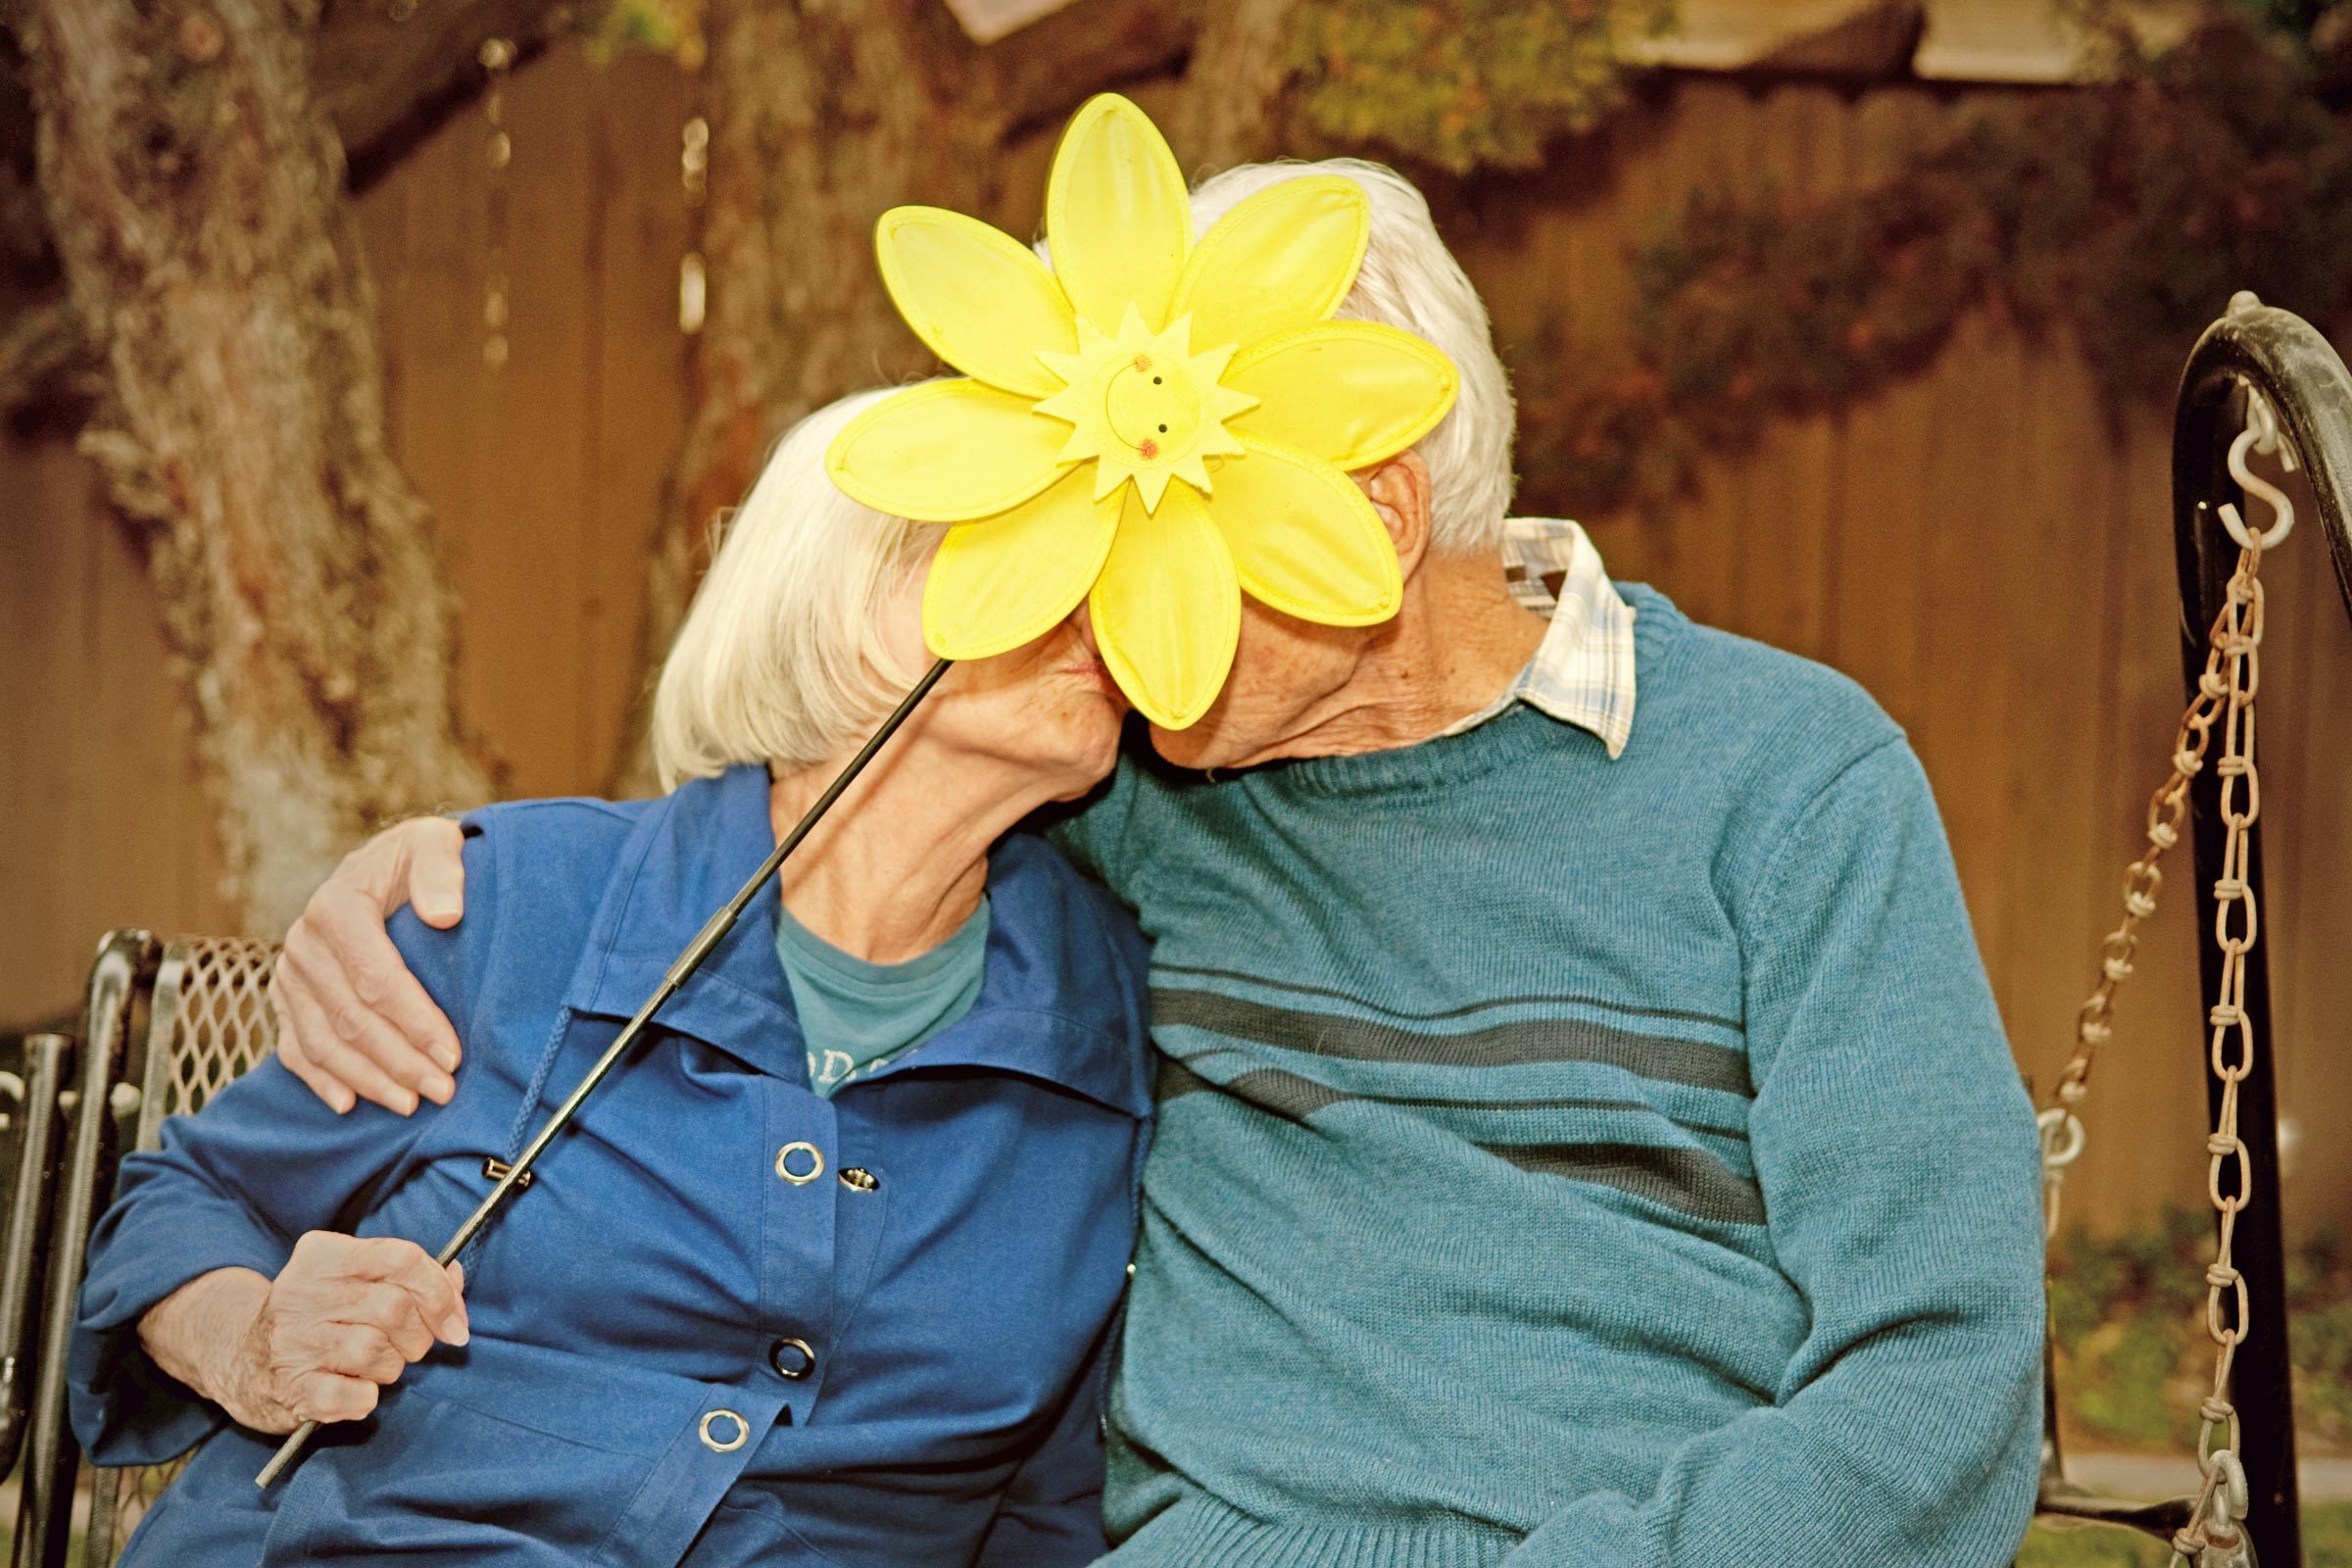 old couple kissing behind a sunflower